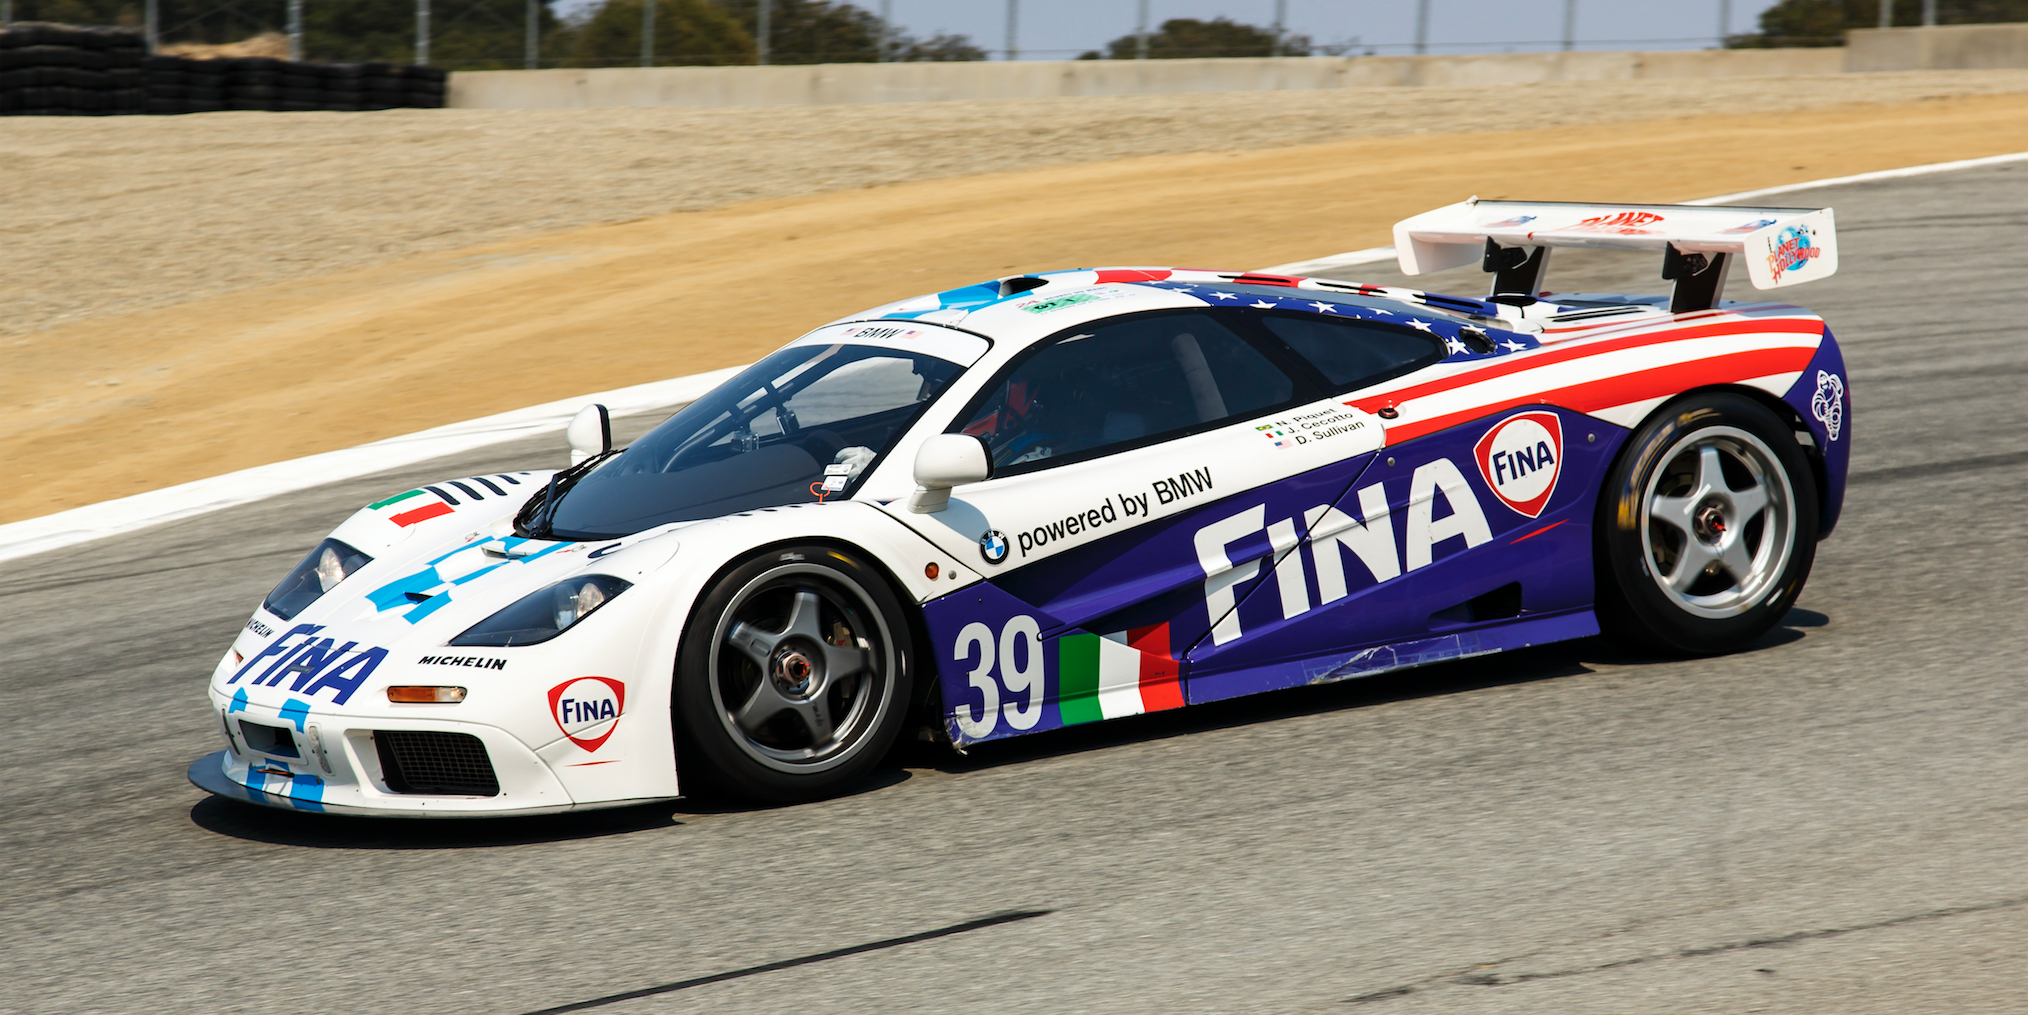 The Best-Sounding Race Cars on Earth